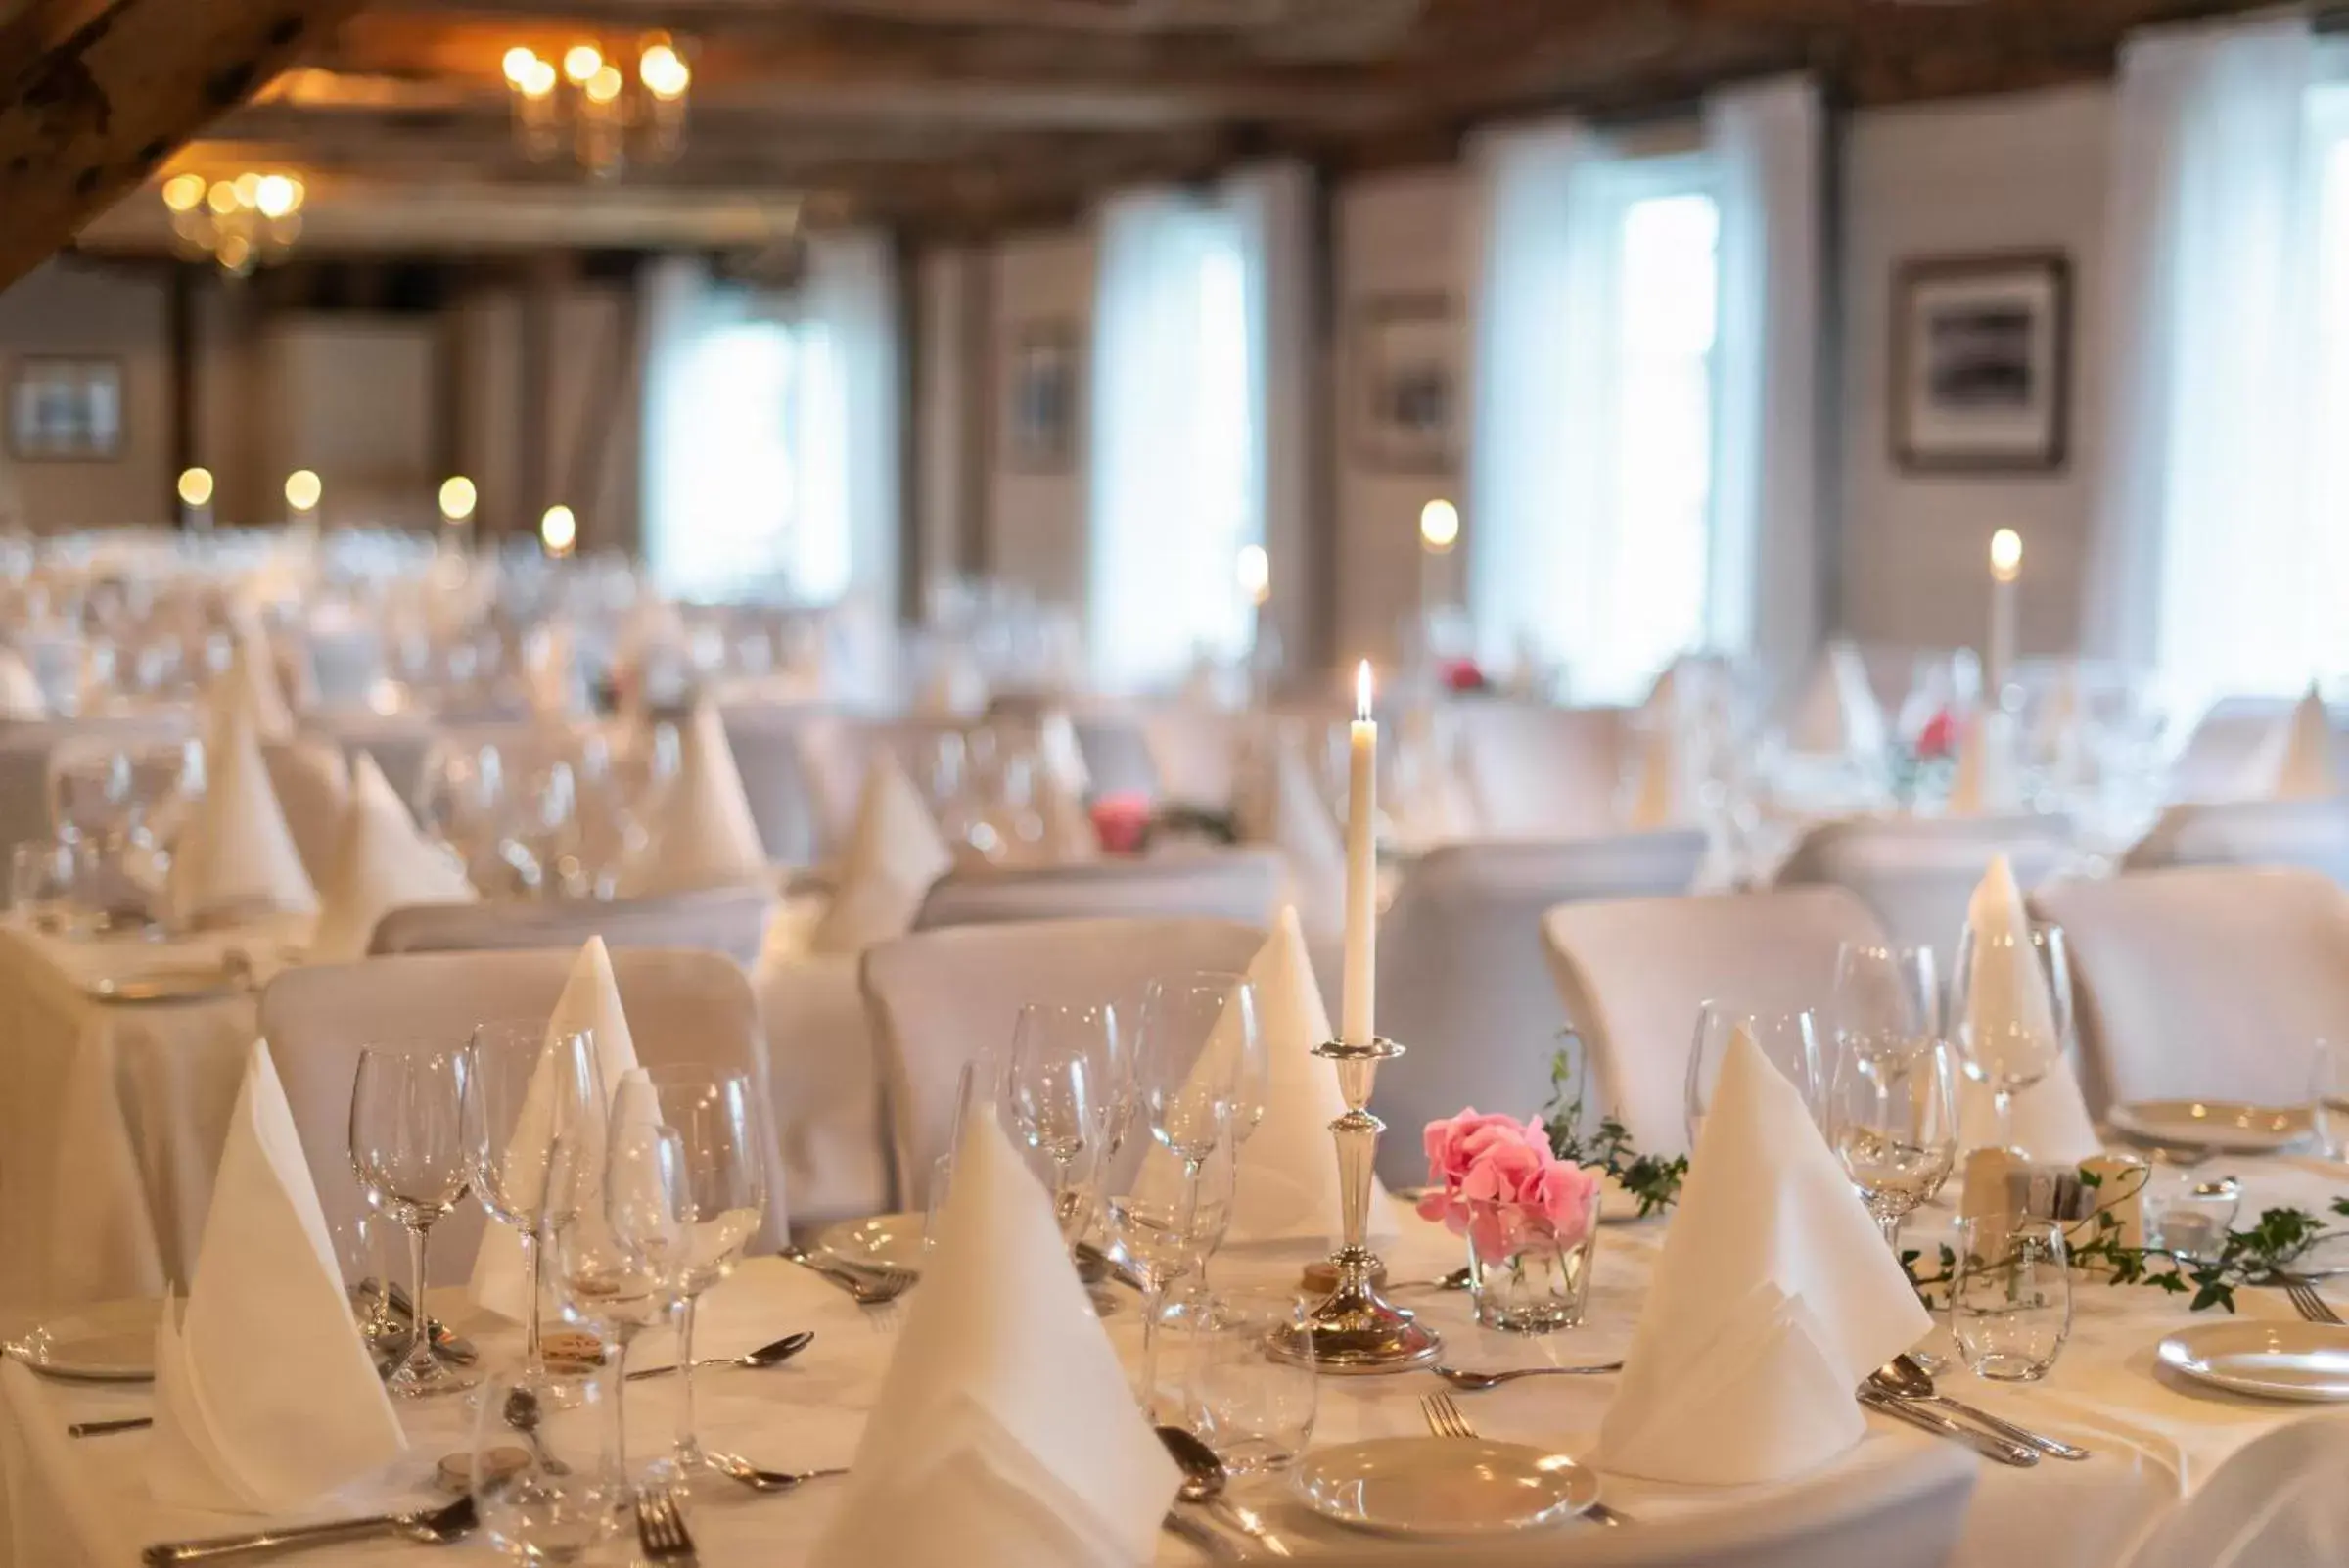 Banquet/Function facilities, Banquet Facilities in Quality Hotel Florø